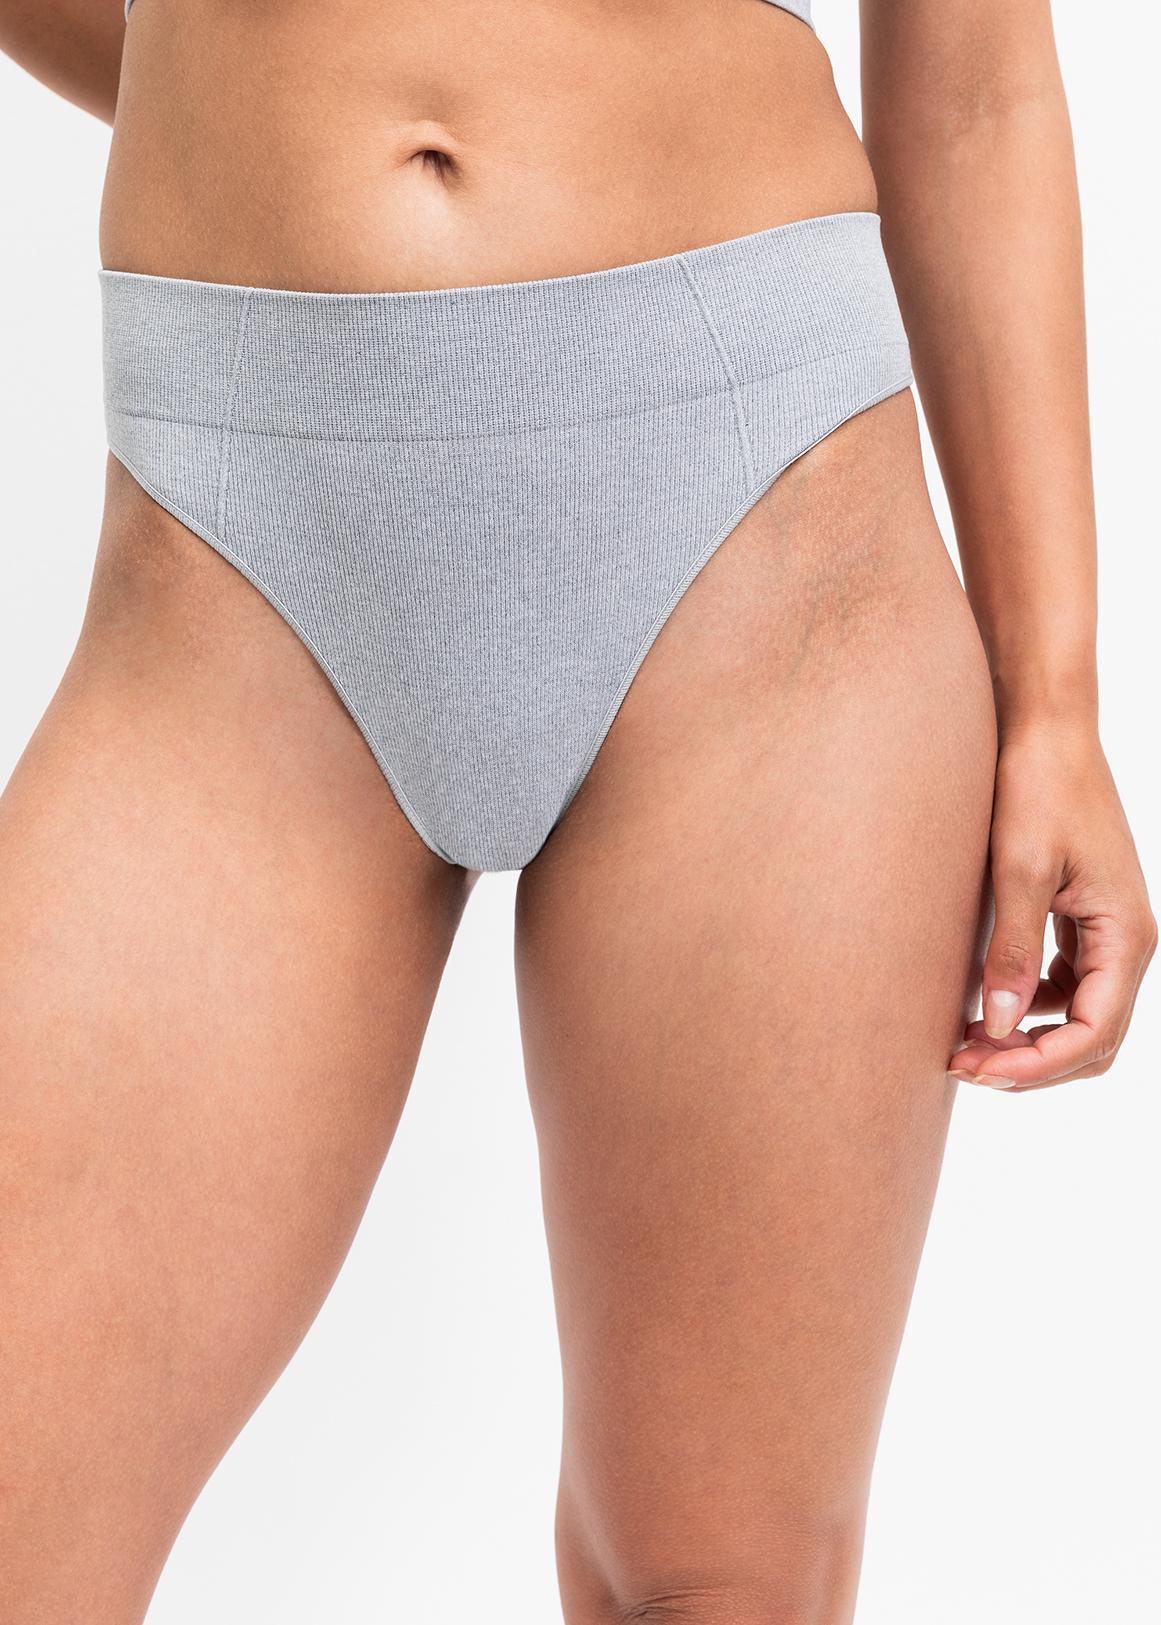 WOOLWORTHS - WRewards exclusive! Get 3 for the price of 2 when you shop  women's single panties.